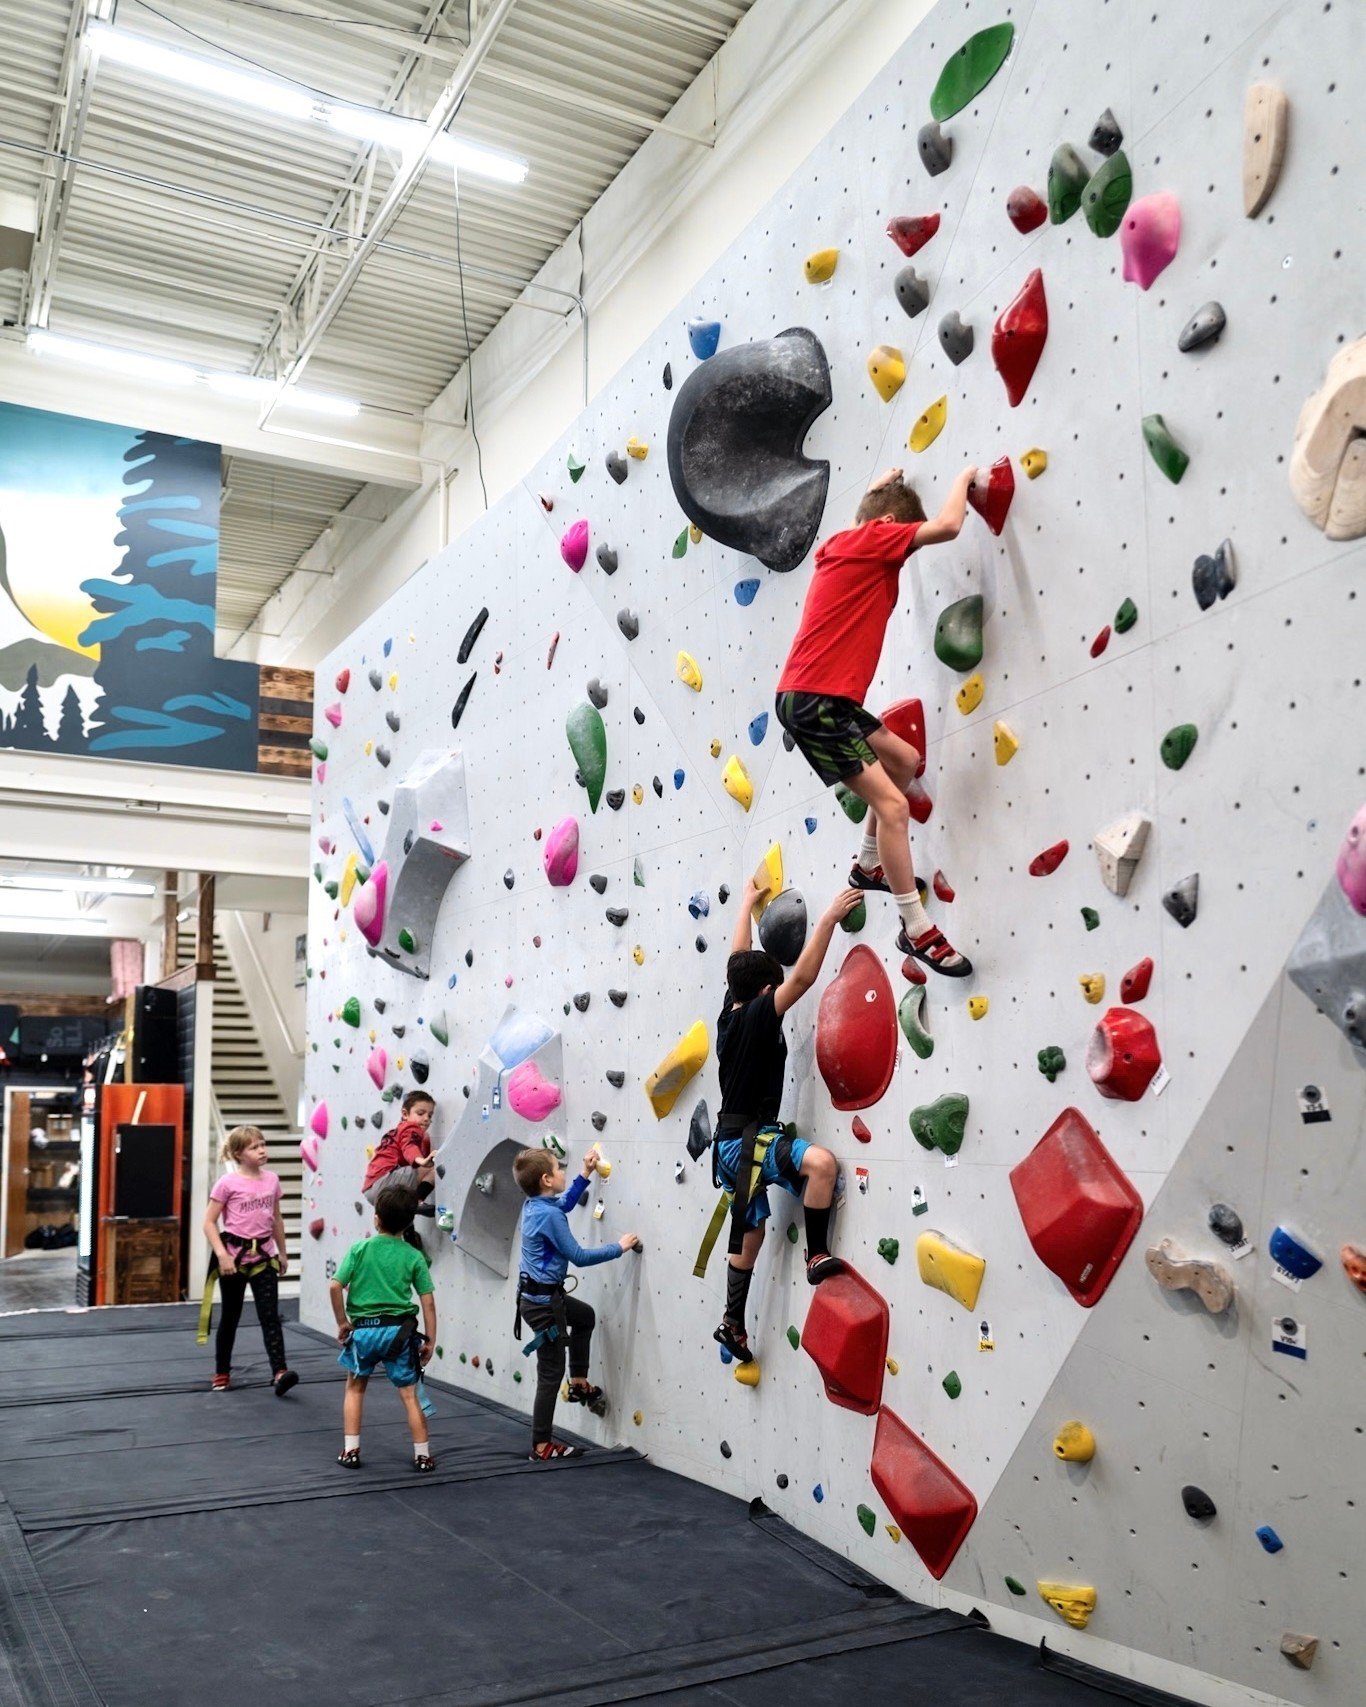 Make sure to get the kids signed up for summer camps! We have 10 sessions to choose from starting June 17th all the way to August 26th. During each camp session your kids will play games, learn climbing techniques, have a nutritious snacks, and make 